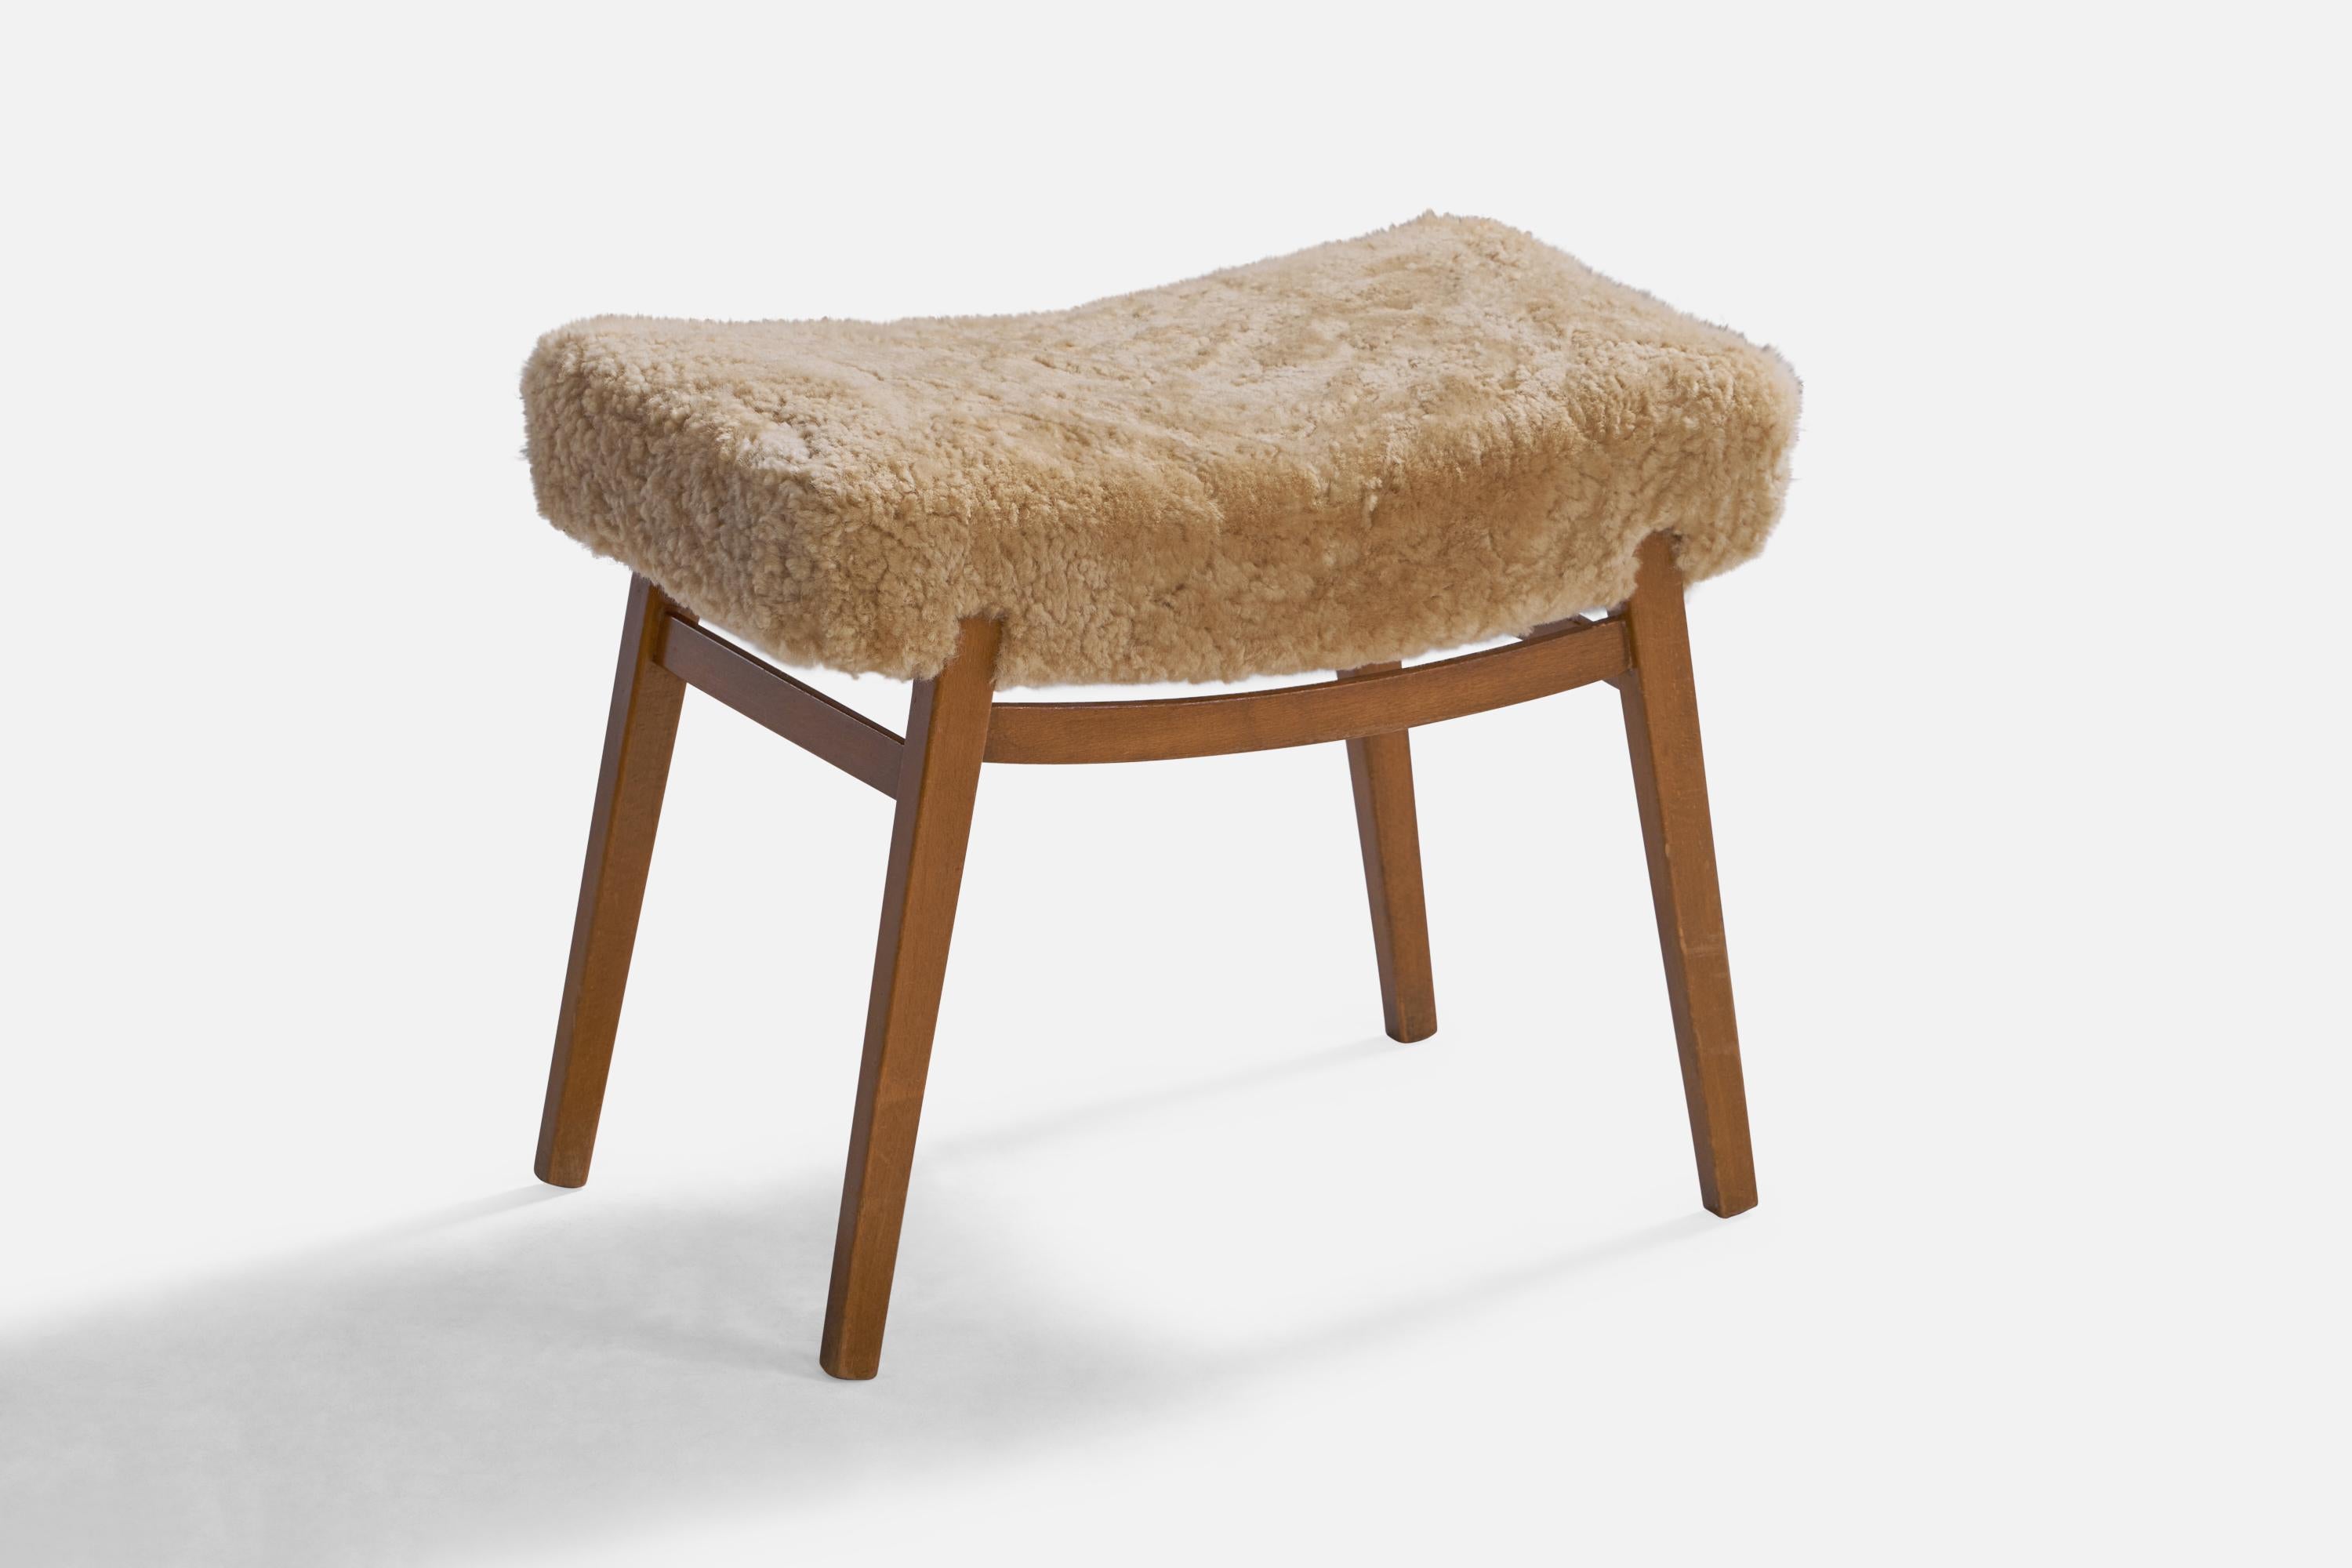 An oak and shearling stool designed and produced in Sweden, 1950s.

Seat height: 17.5”